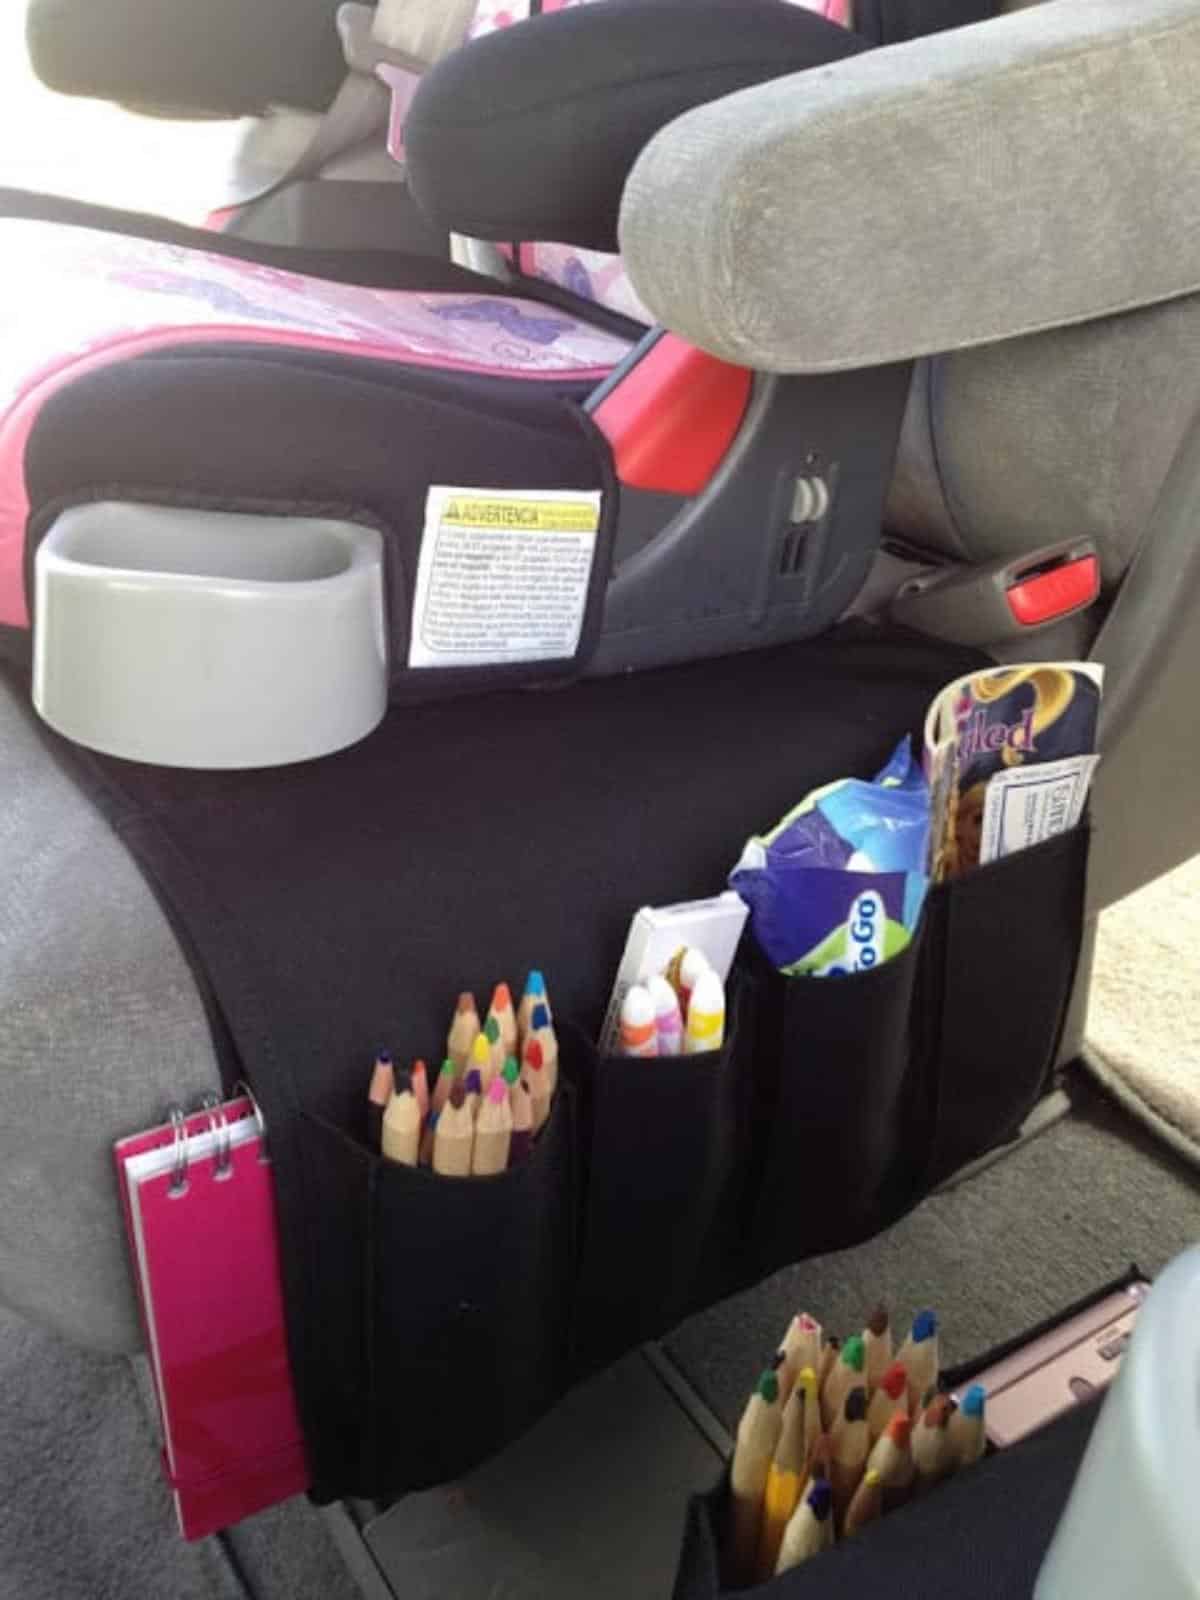 10-Minute DIY: Hanging Tissue Box Holder...for the CAR!! | Make It & Love It